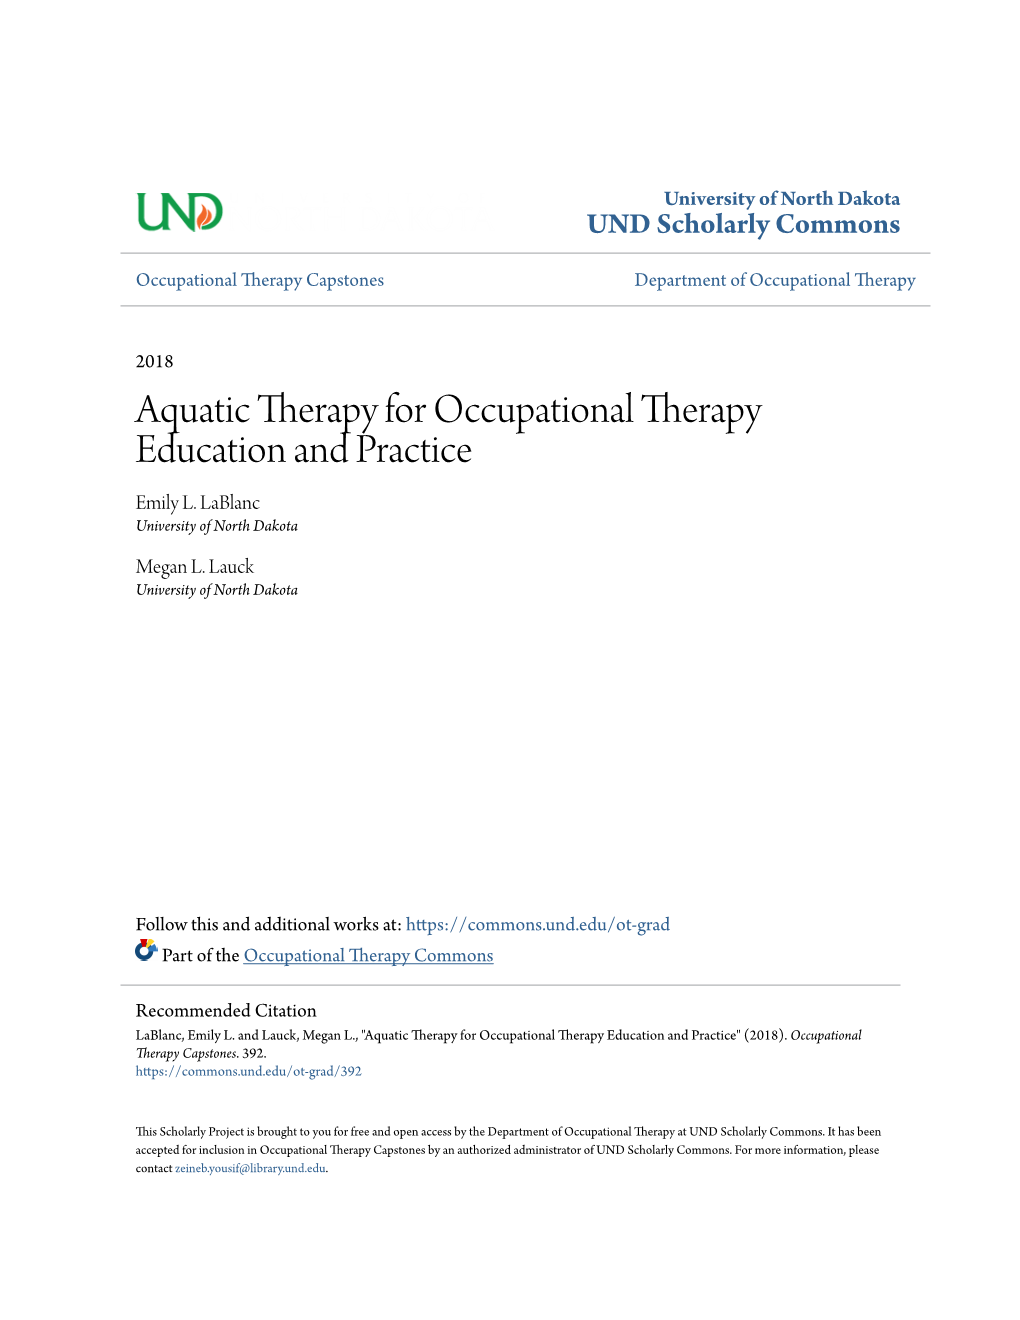 Aquatic Therapy for Occupational Therapy Education and Practice Emily L